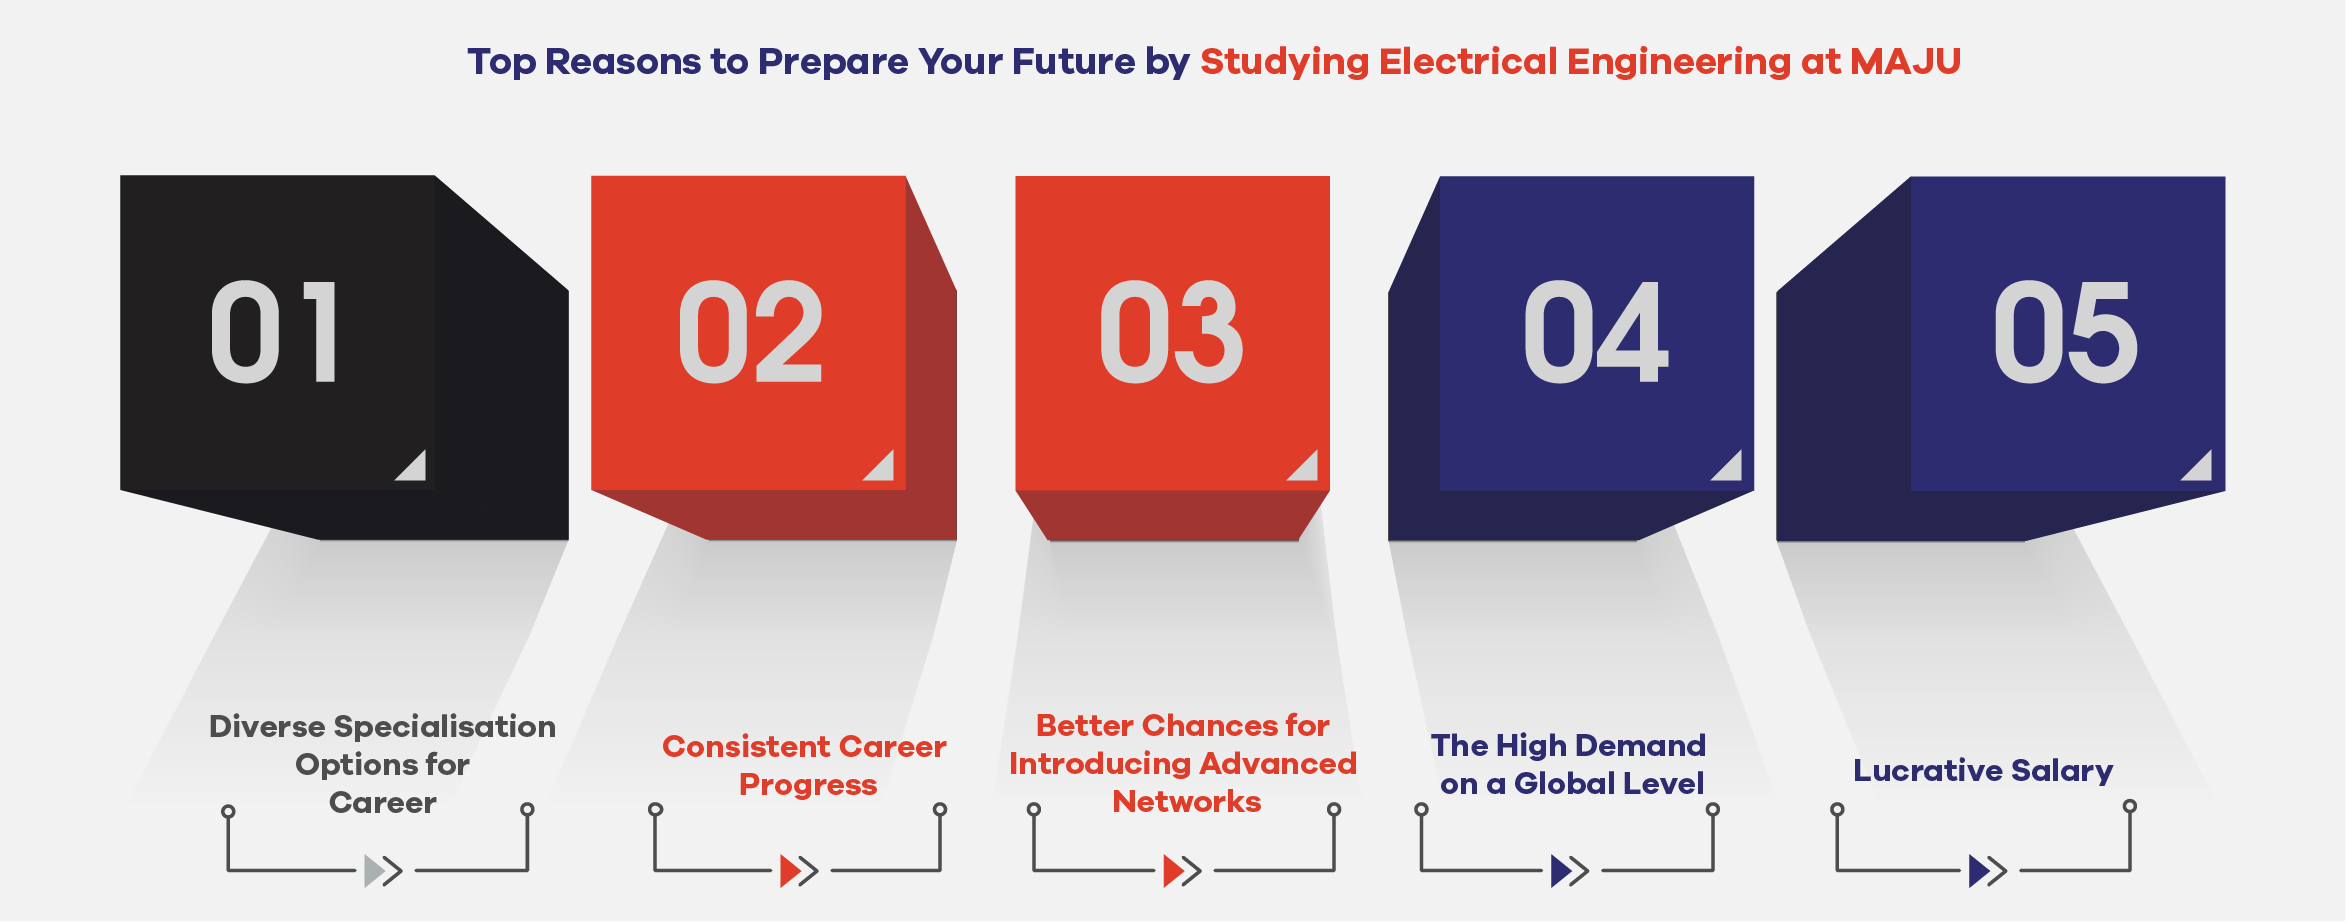 Top Reasons to Prepare Your Future by Studying Electrical Engineering at MAJU 